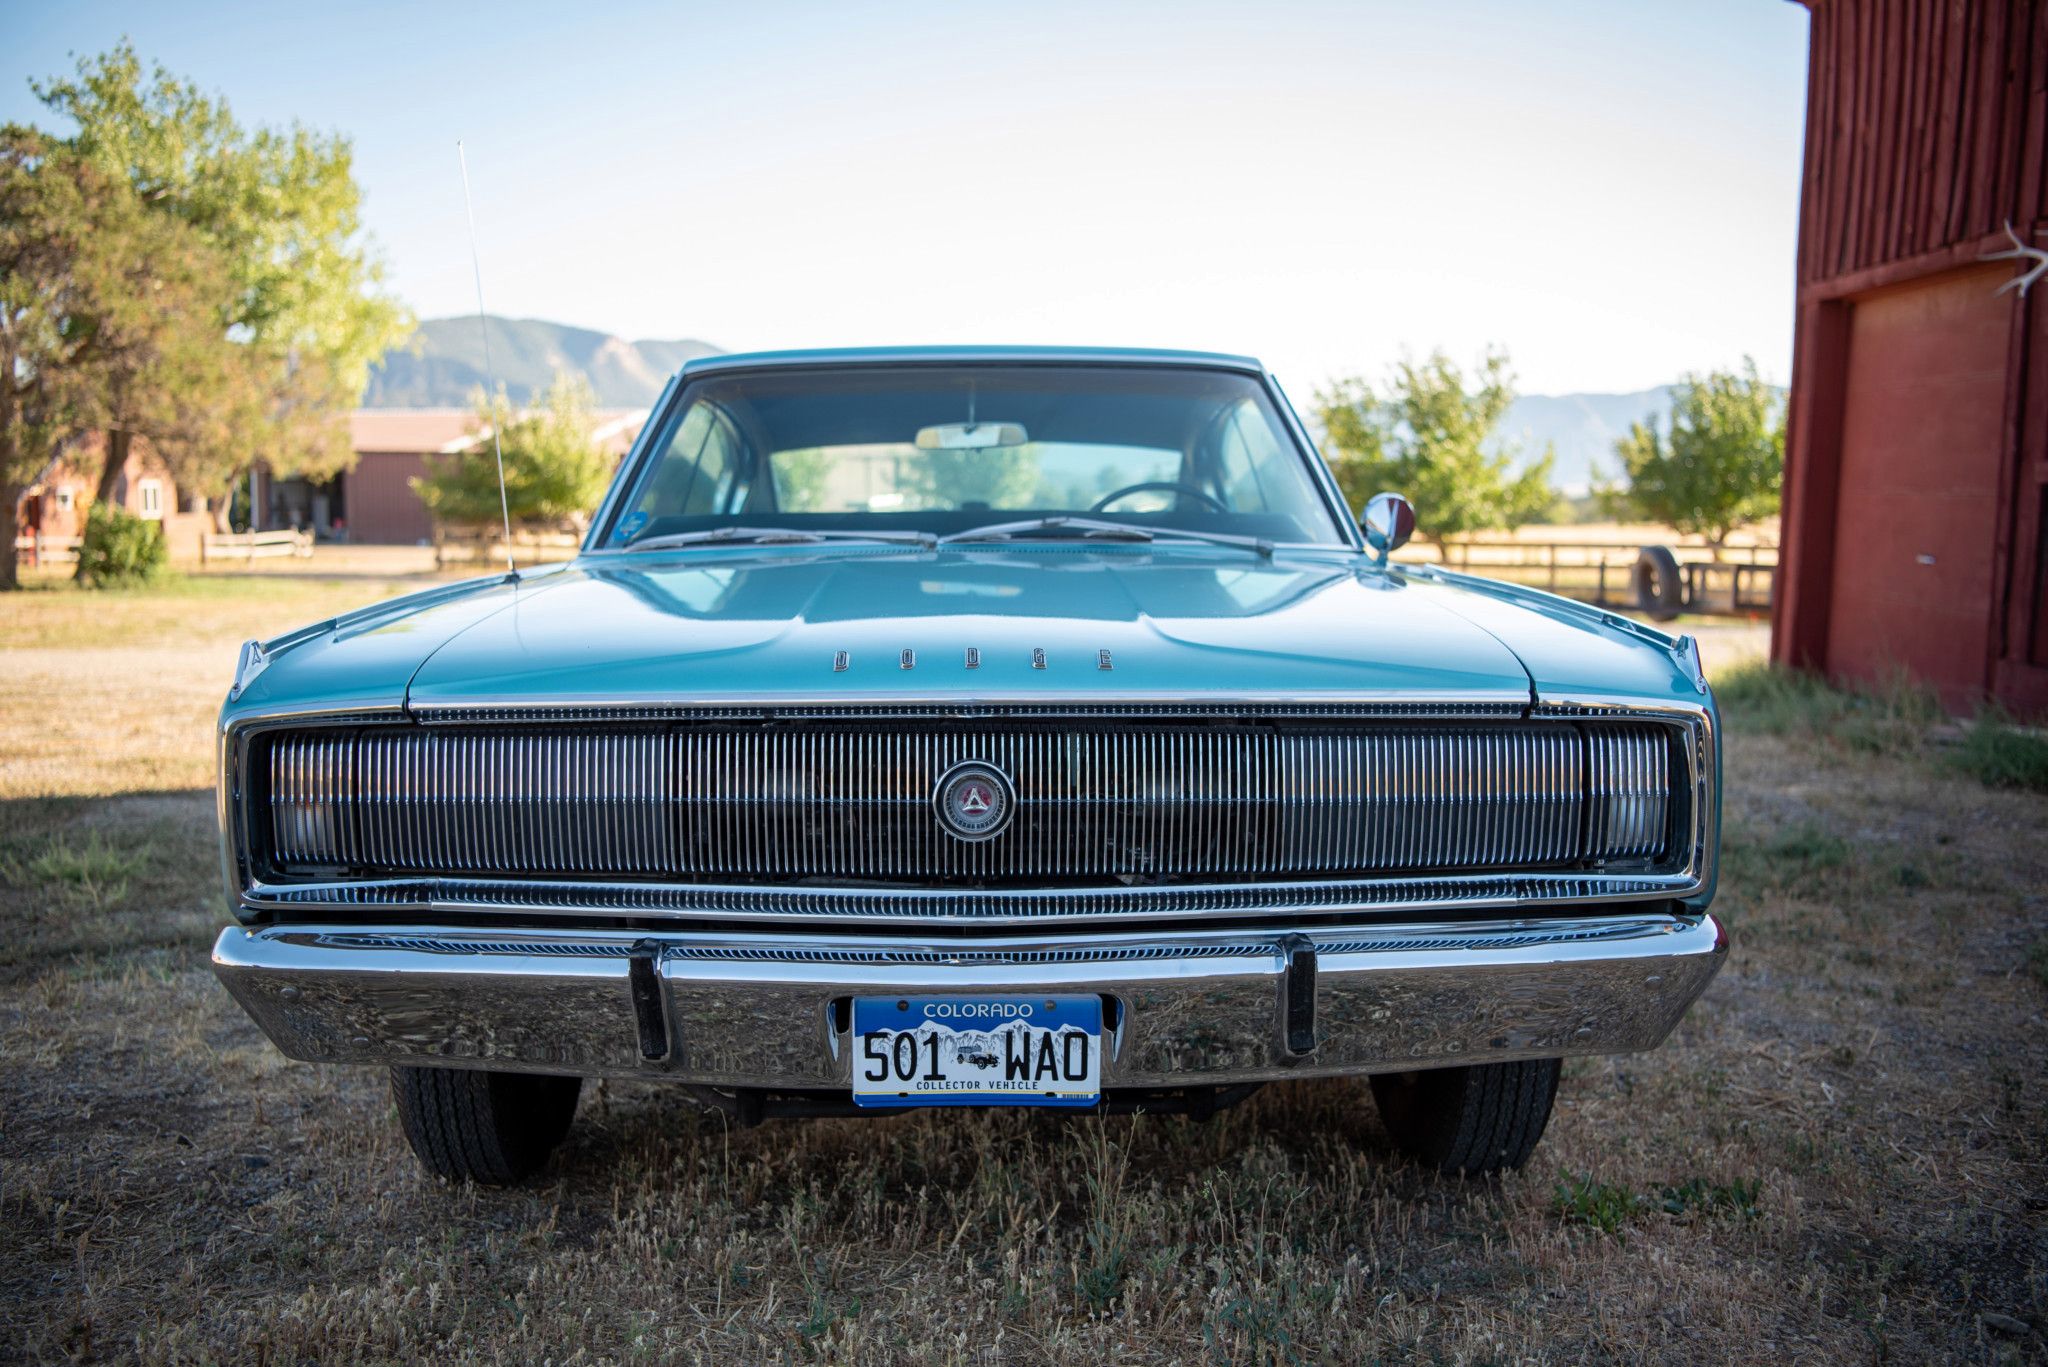 How much is this 1967 Dodge Charger worth?